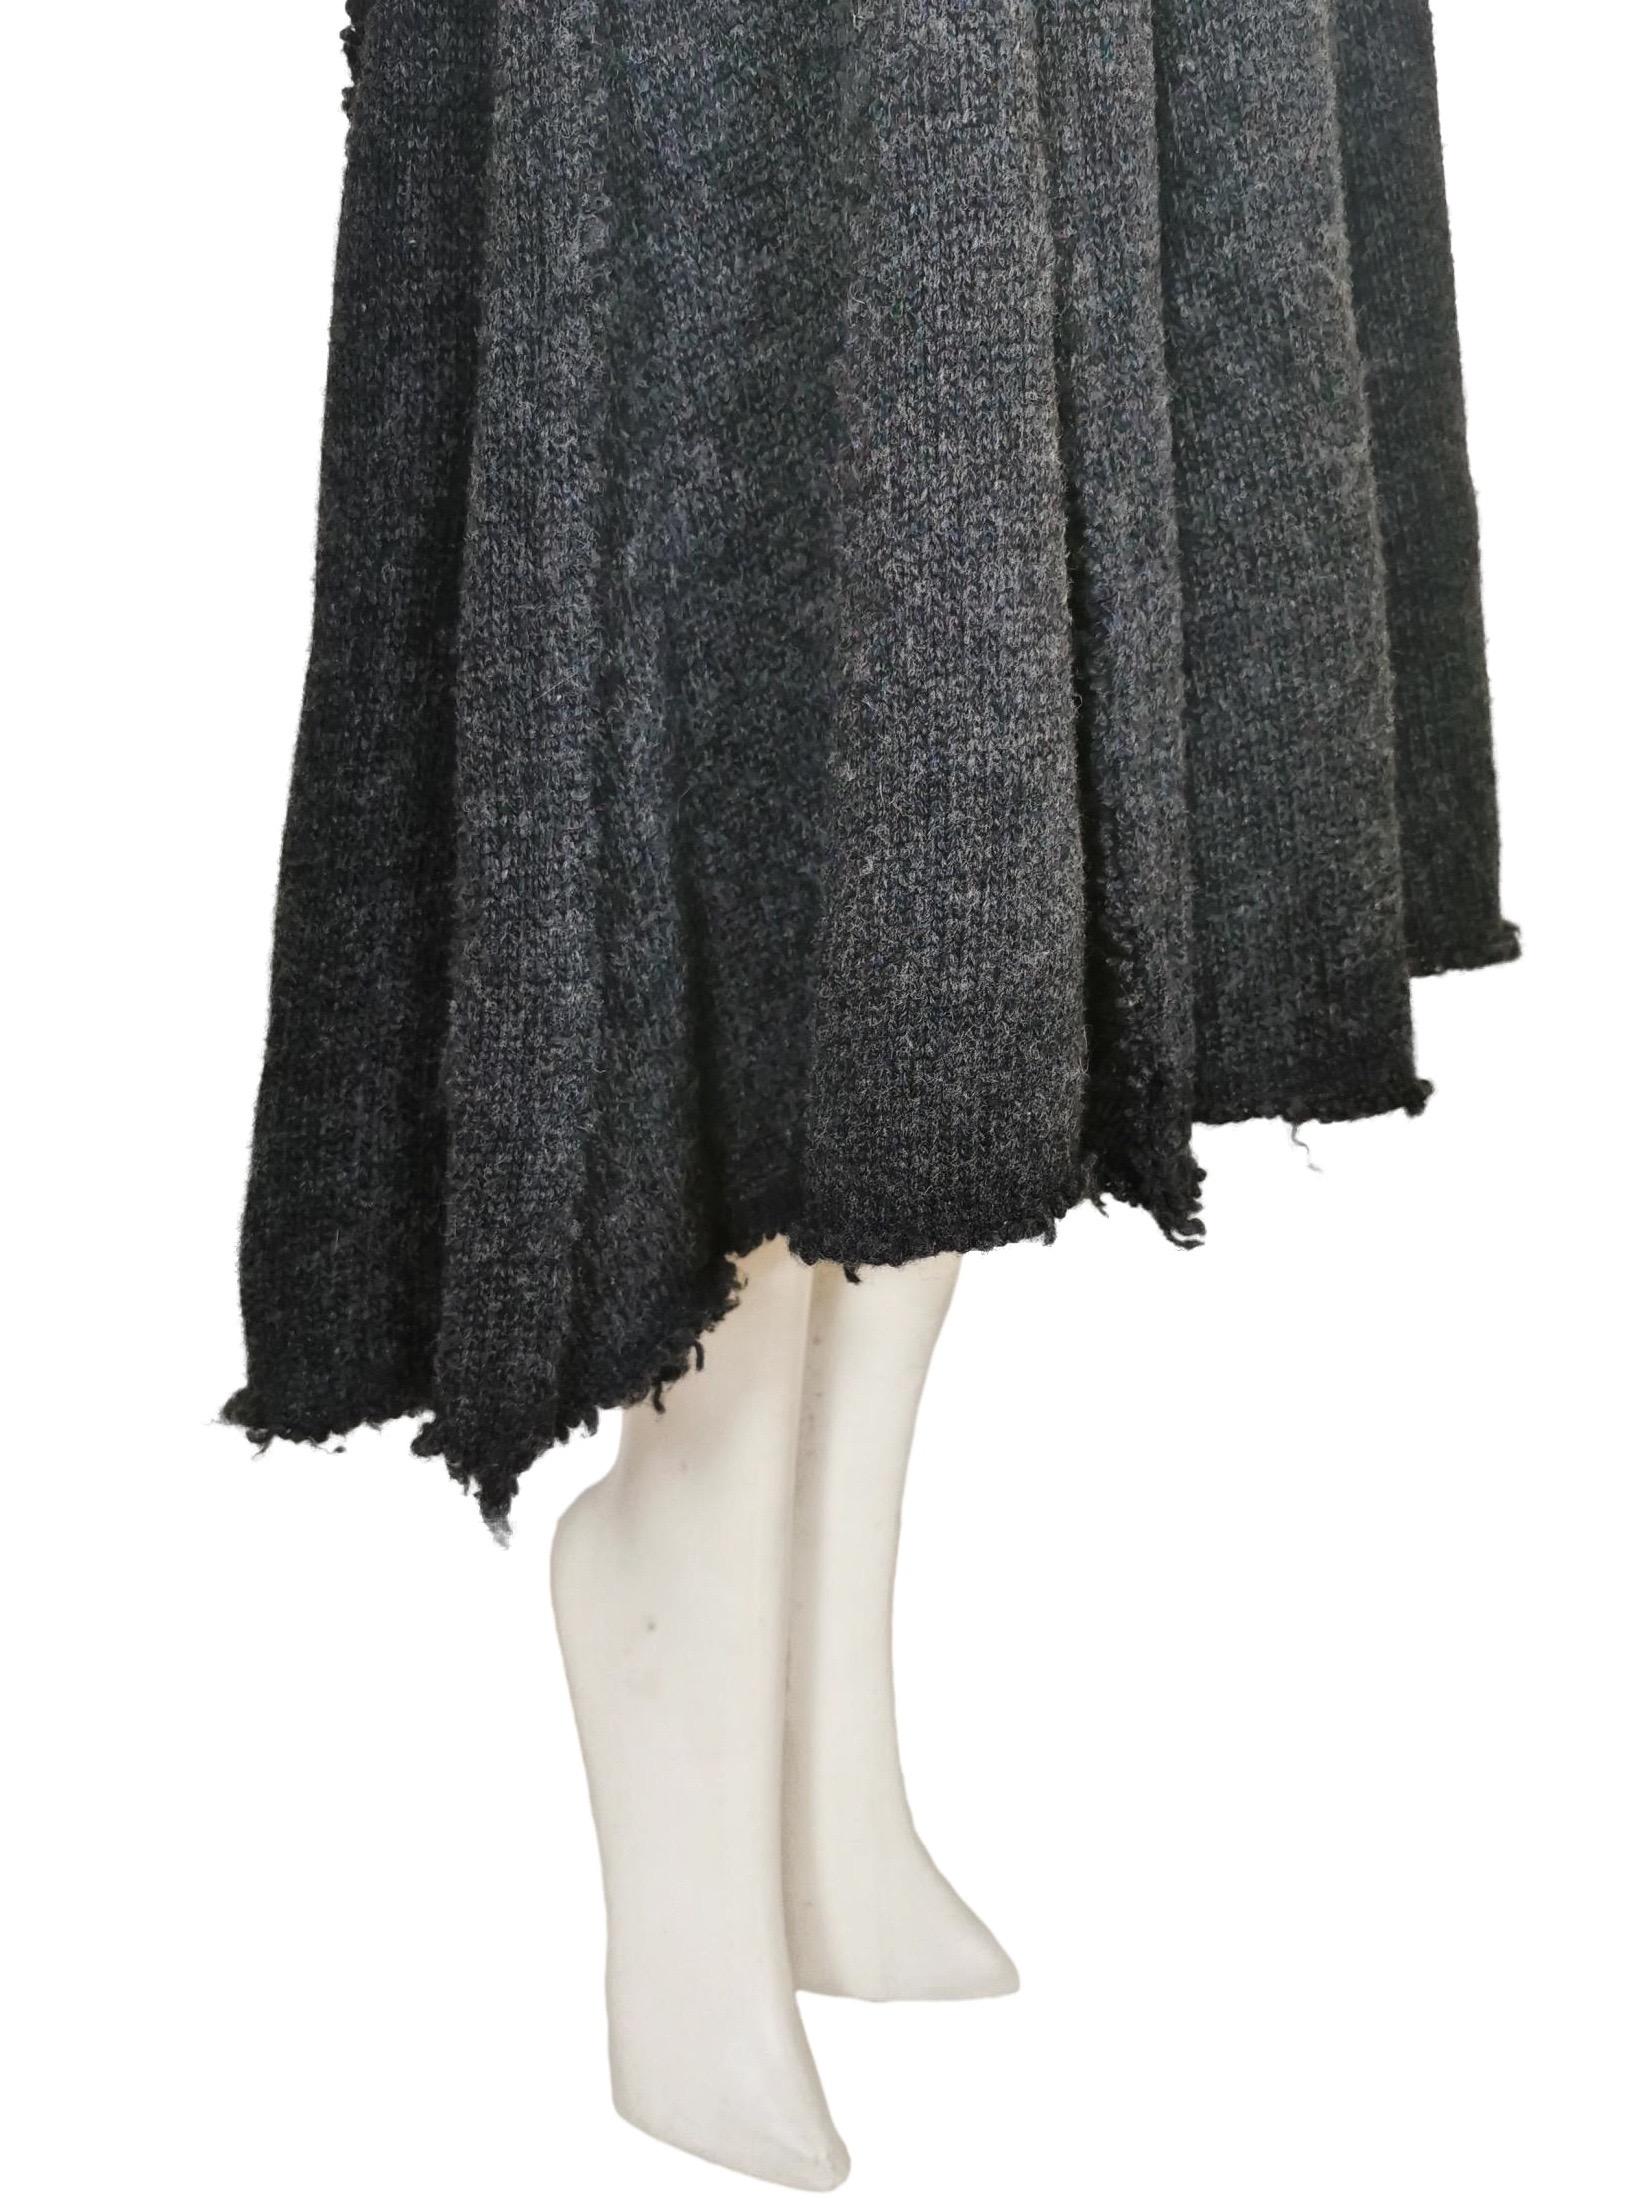 Comme des Garcons Wool Knit Raw Edge Skirt AD 2002 For Sale 5